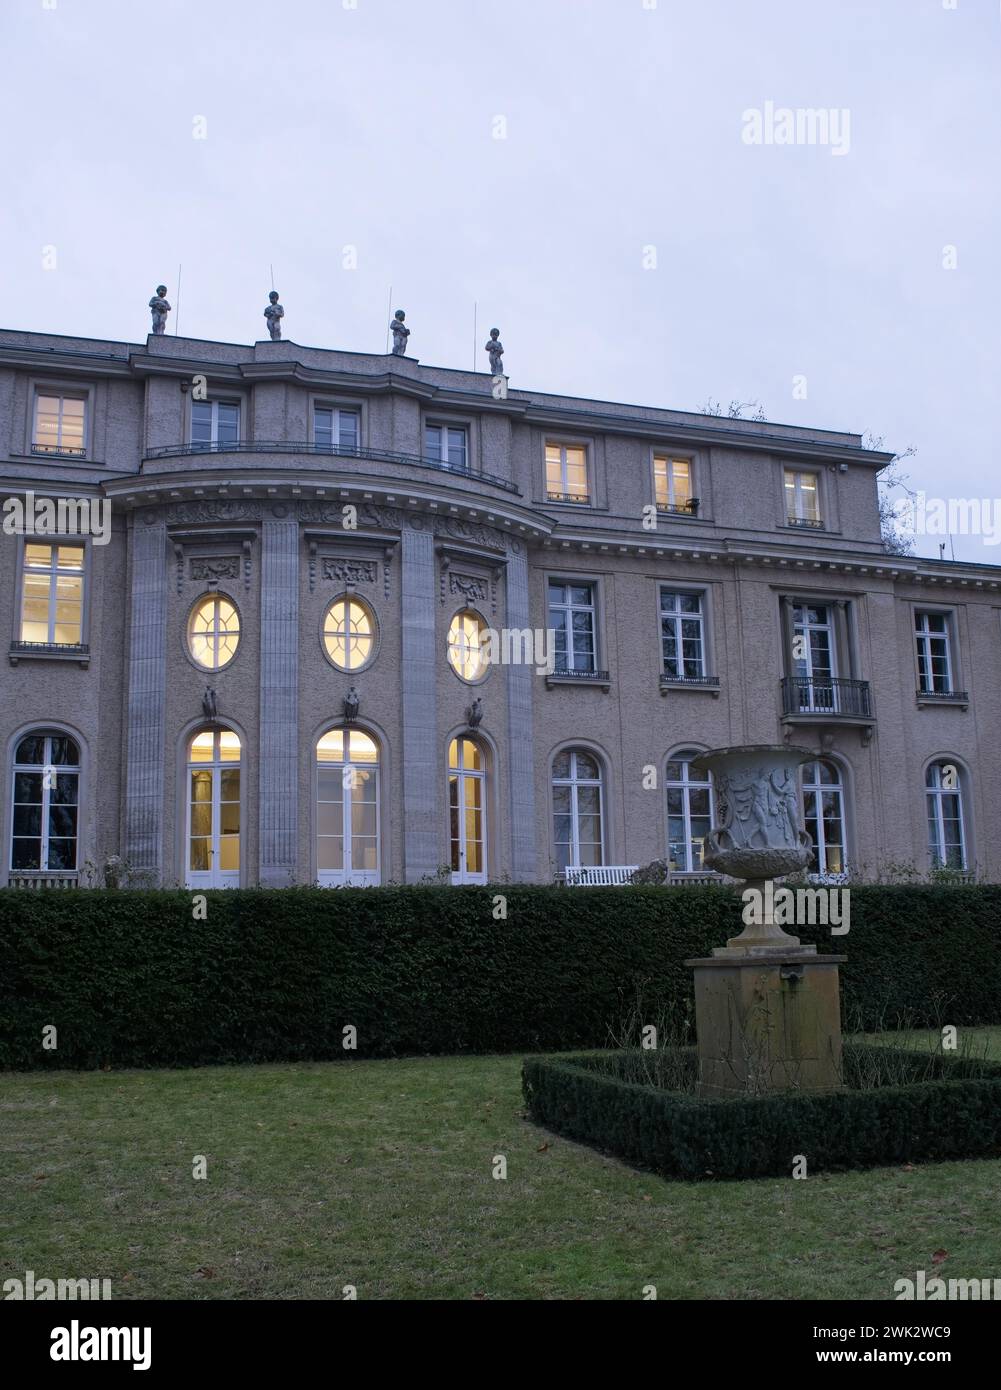 Berlin, Germany - Jan 22, 2024: Holocaust memorial and museum known as the Haus der Wannsee-Konferenz (House of the Wannsee Conference). Cloudy winter Stock Photo